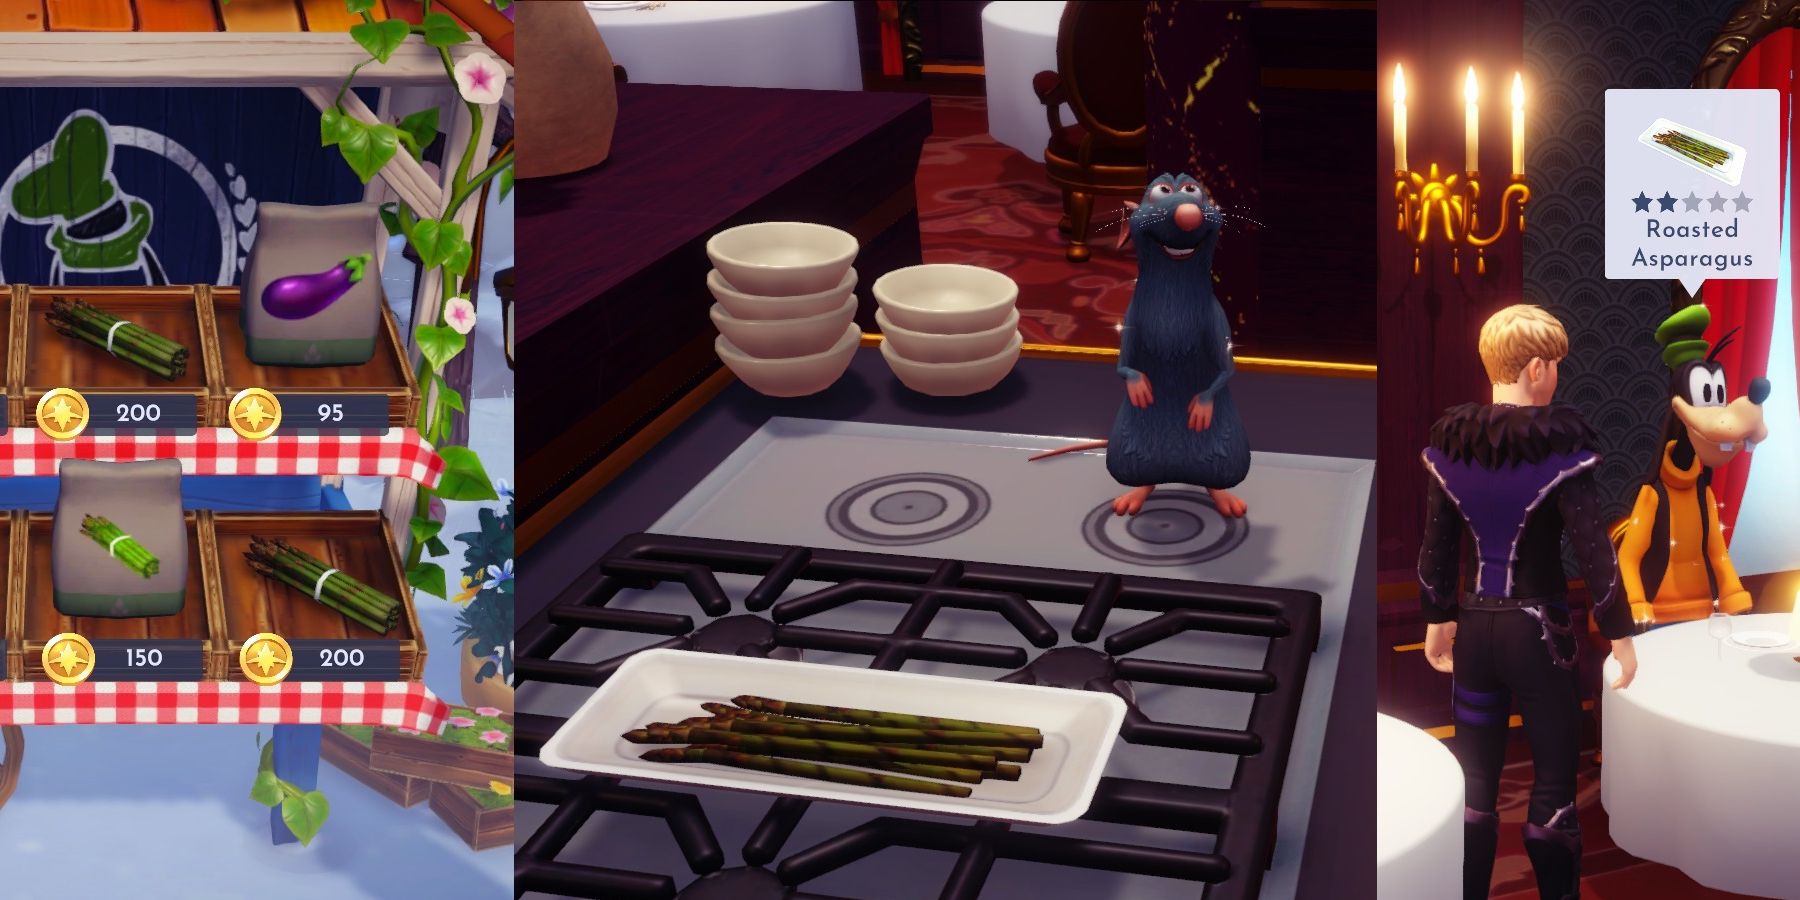 disney-dreamlight-valley-how-to-make-roasted-asparagus4